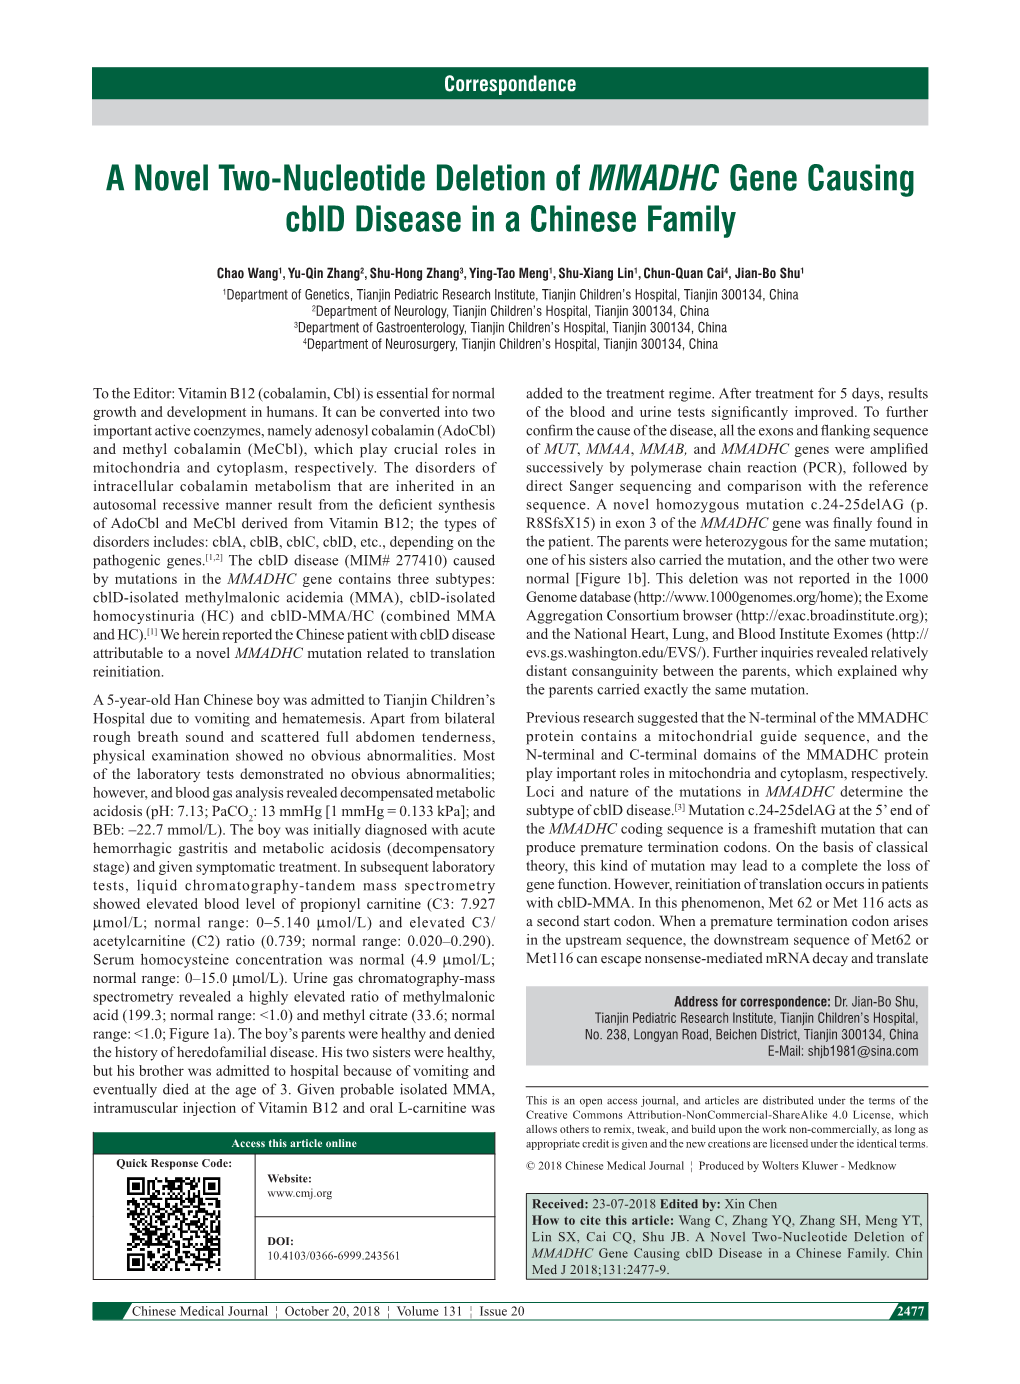 A Novel Two‑Nucleotide Deletion of MMADHC Gene Causing Cbld Disease in a Chinese Family